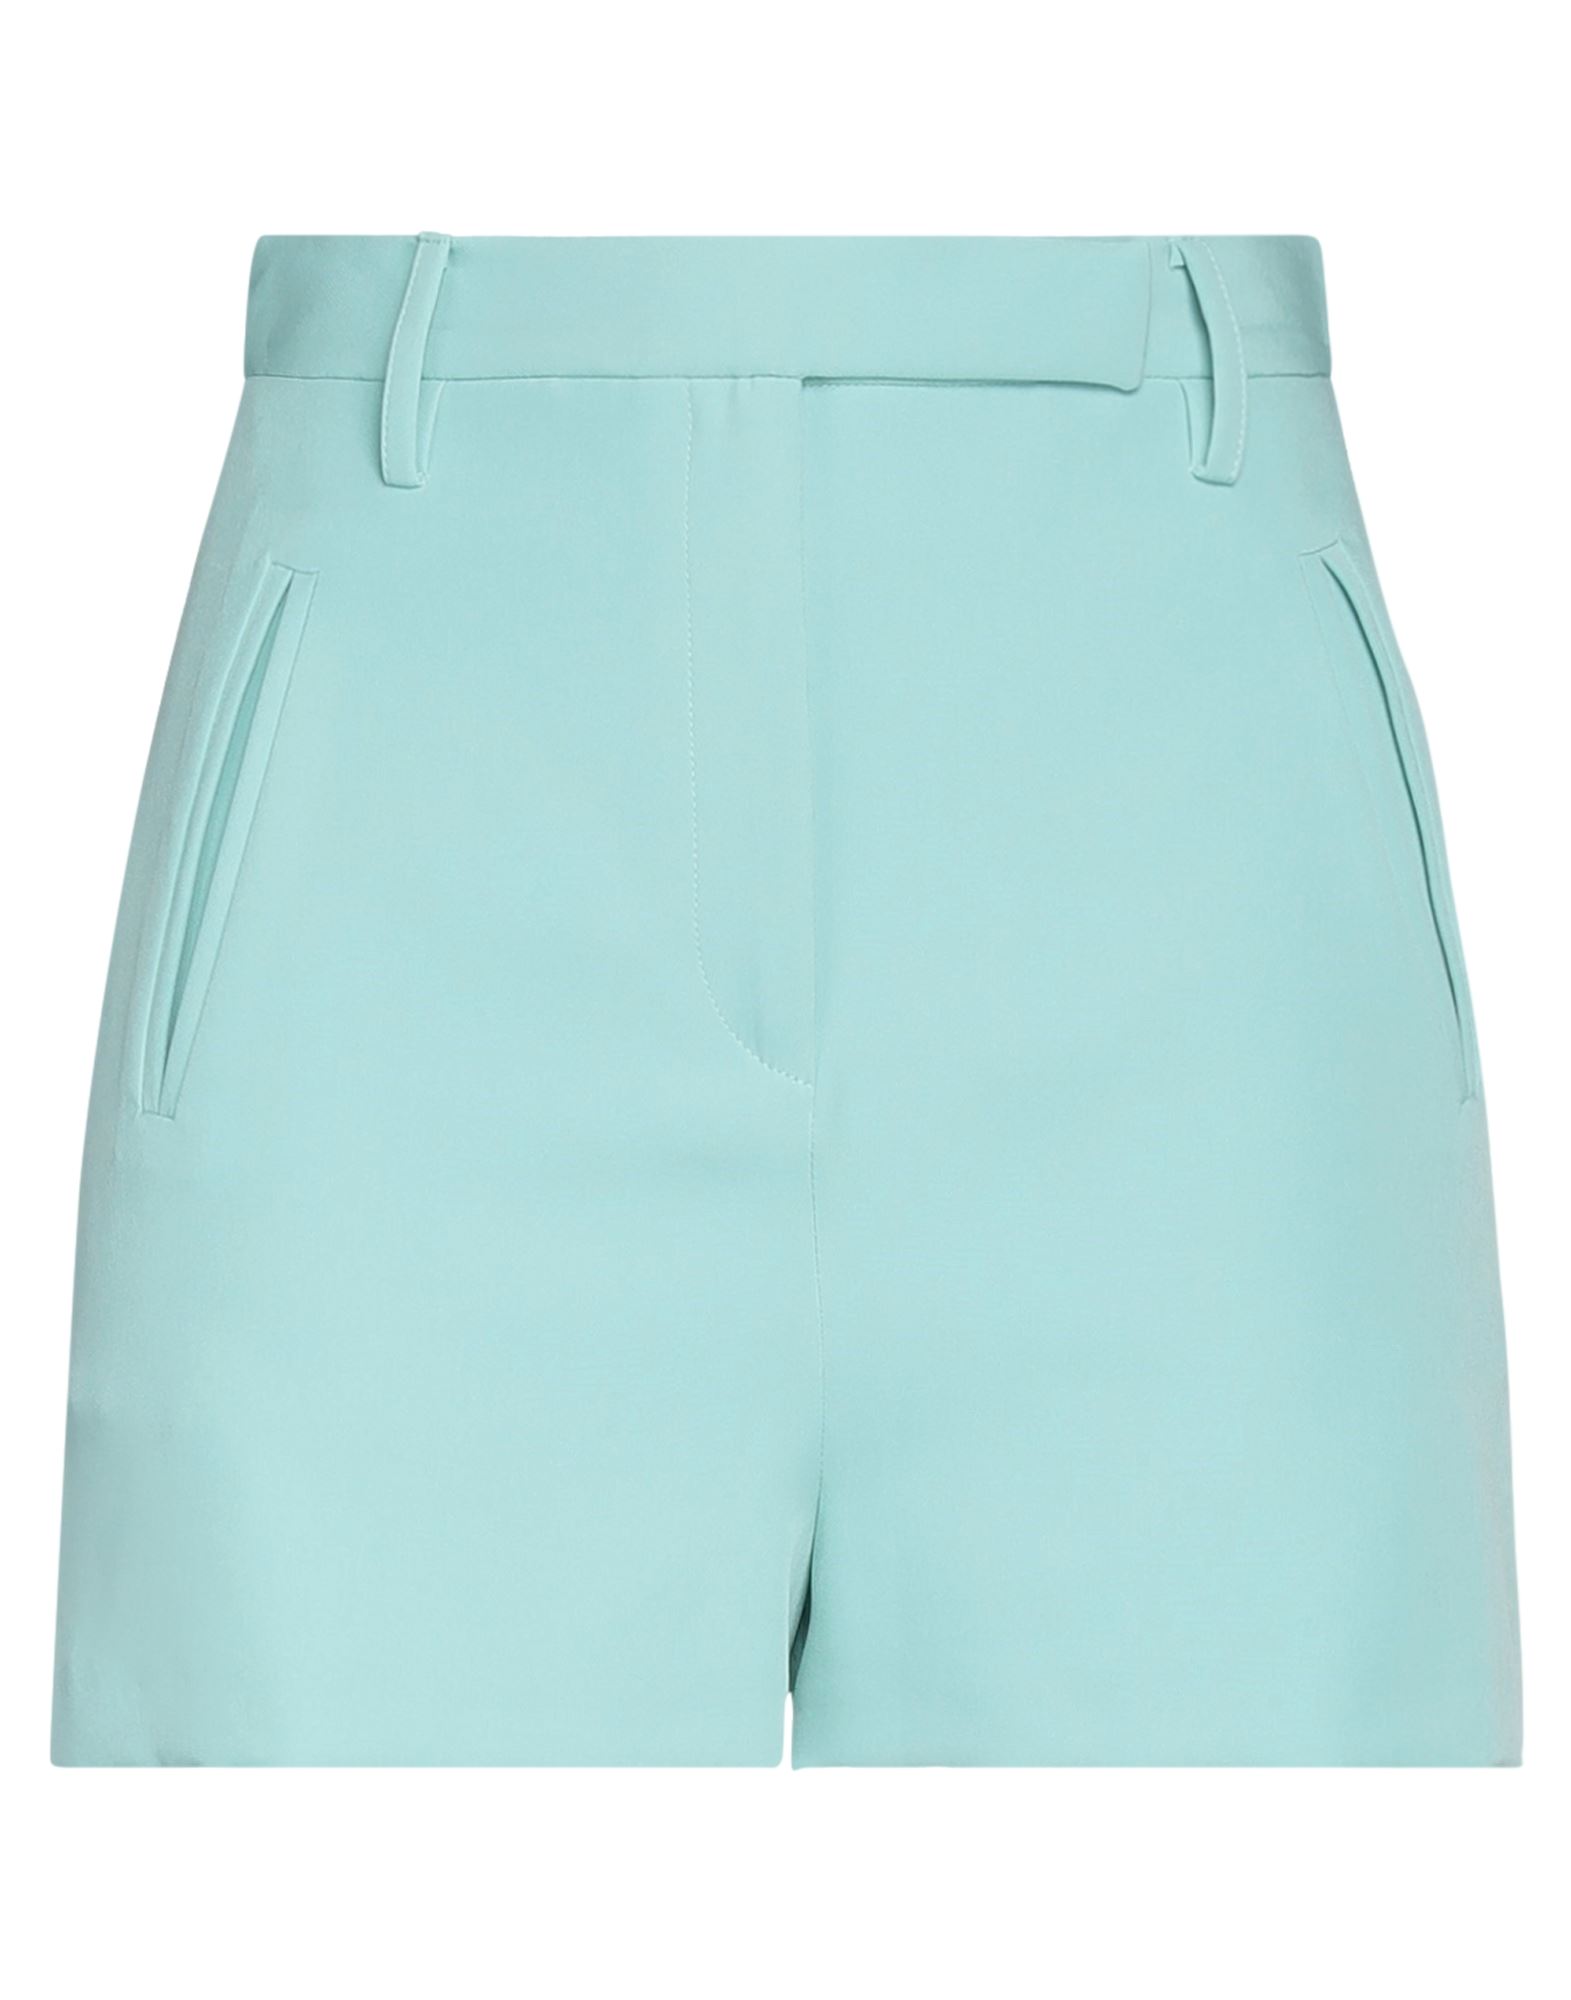 Actualee Shorts & Bermuda Shorts In Turquoise